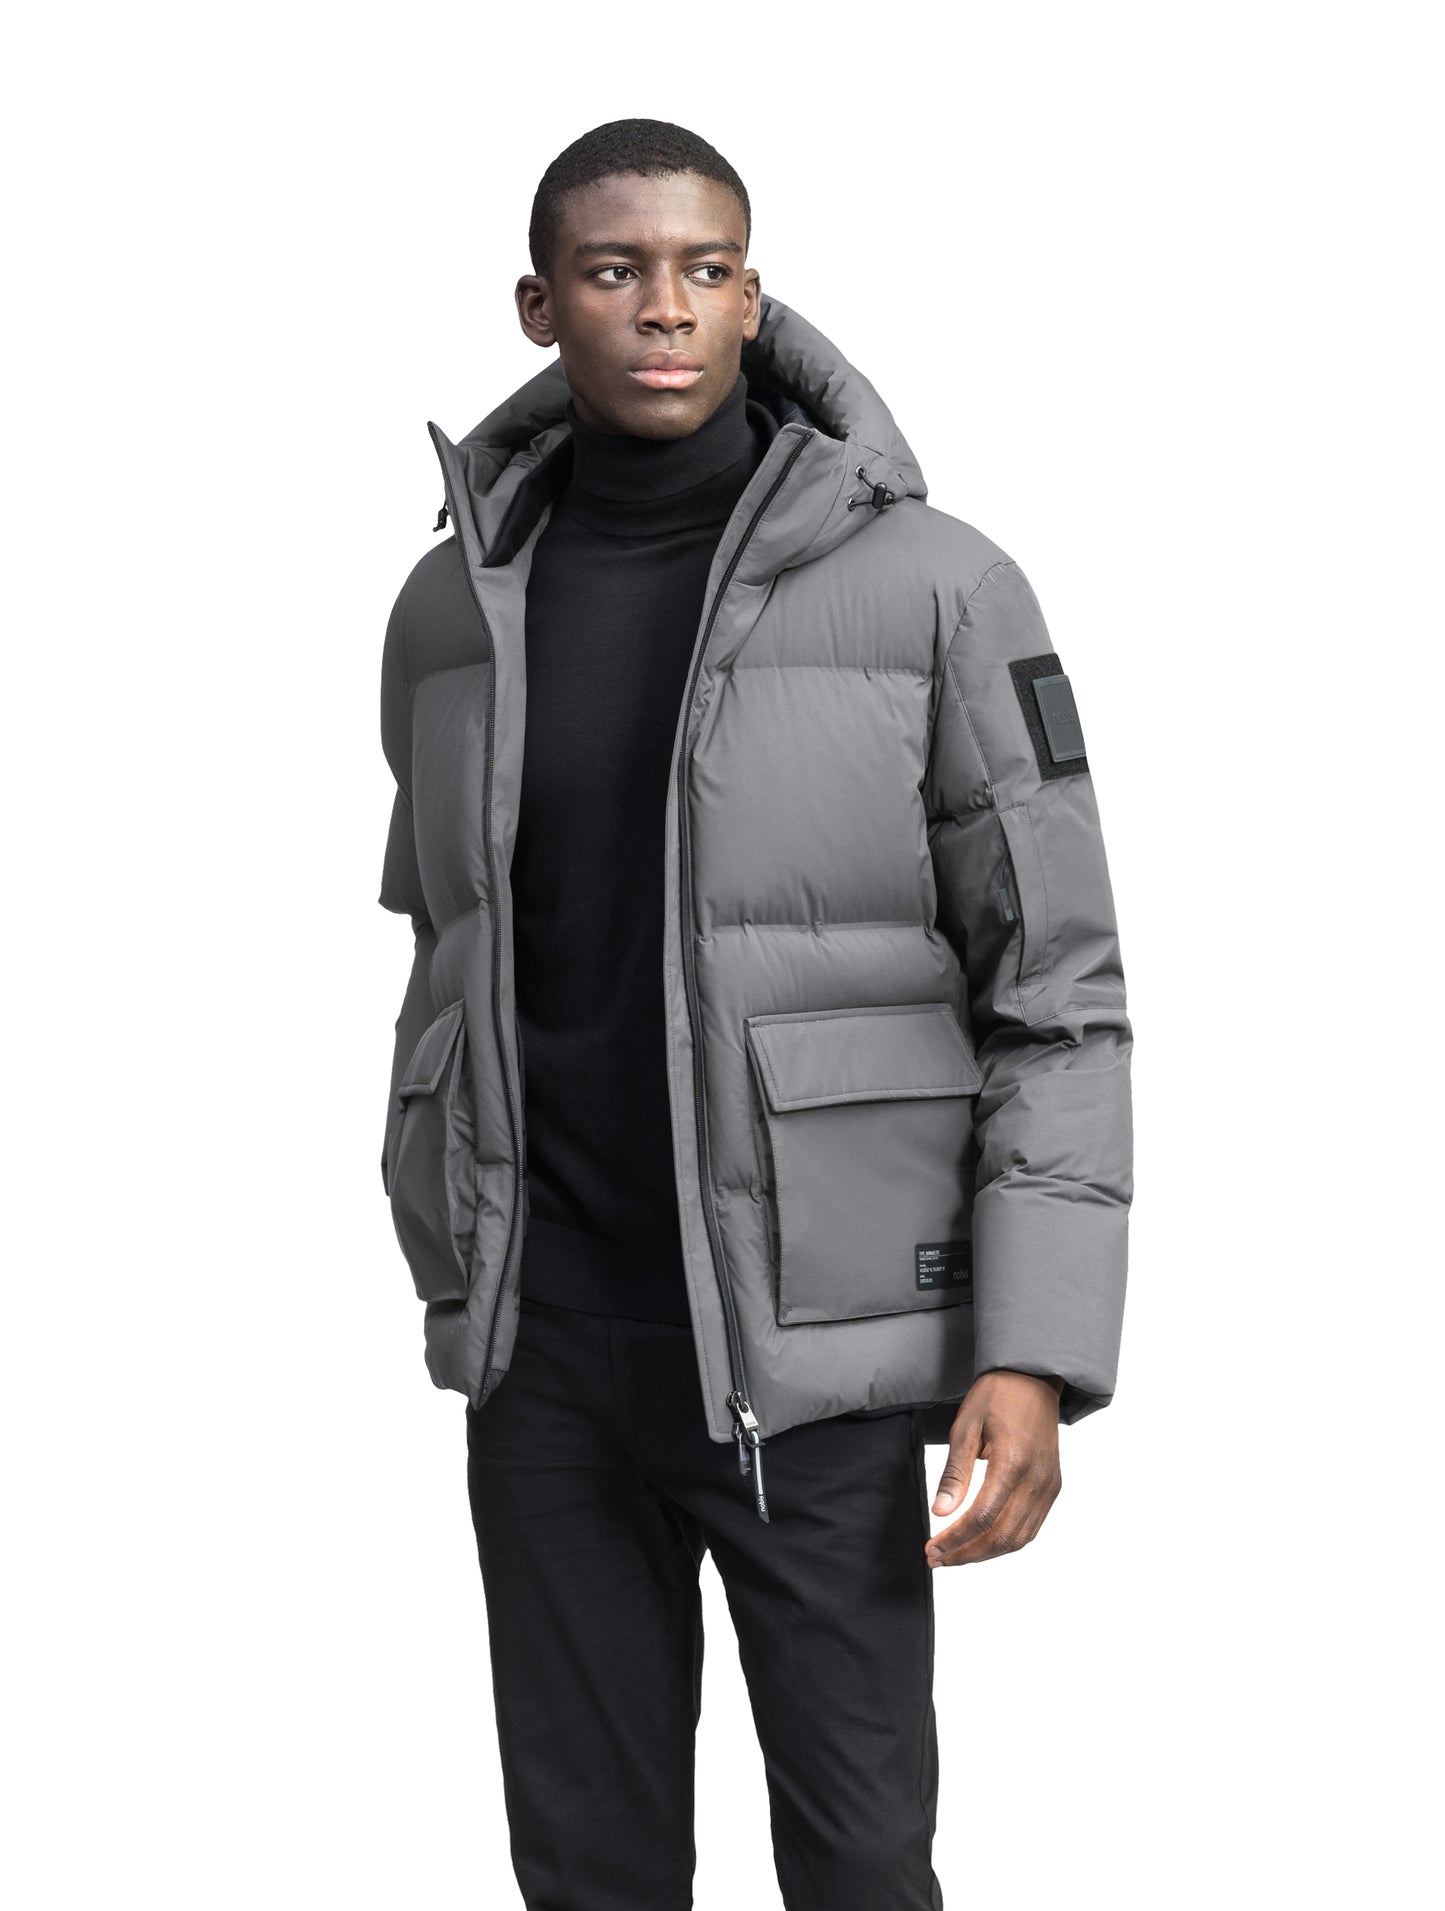 Supra Men's Performance Puffer in hip length, Technical Taffeta and 3-Ply Micro Denier fabrication, Premium Canadian White Duck Down insulation, non-removable down filled hood, centre front two-way zipper, flap pockets at waist, and zipper pocket at left bicep, in Concrete